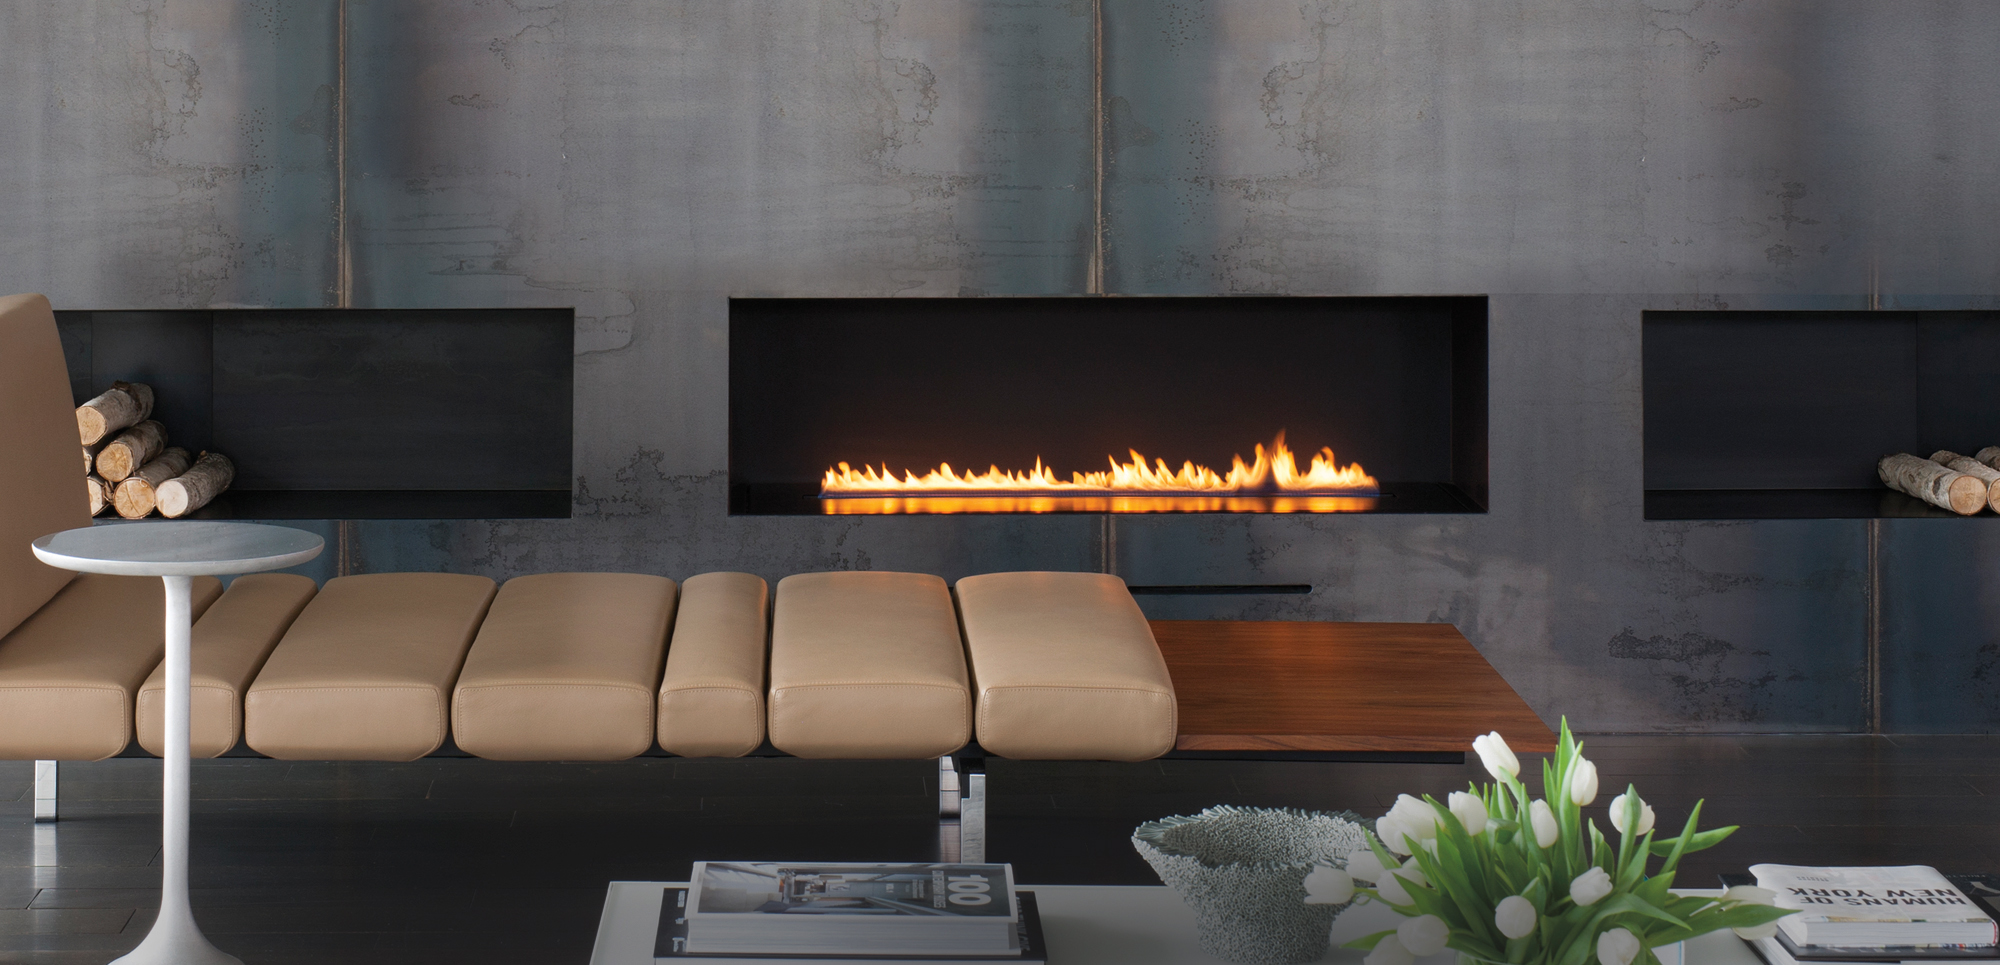 Adding A Fireplace to An Interior Wall Awesome Spark Modern Fires